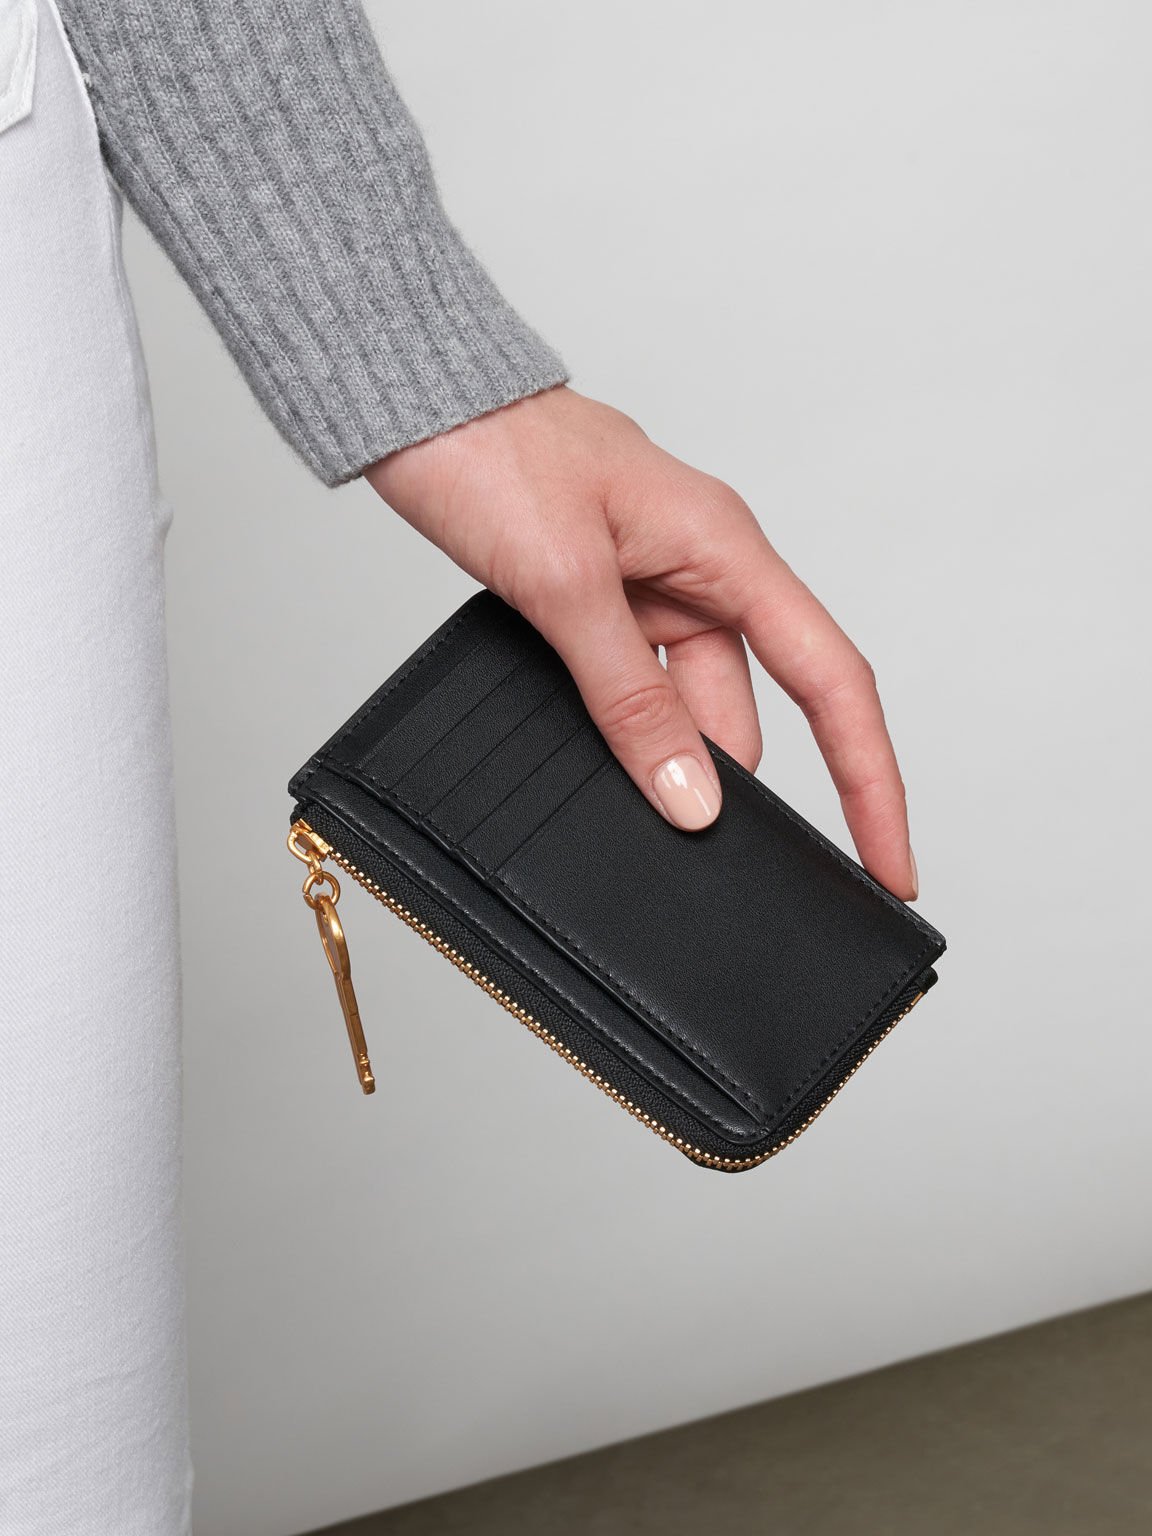 Small wallet made of soft leather, with credit card slots and zipper -  AdelBags.com